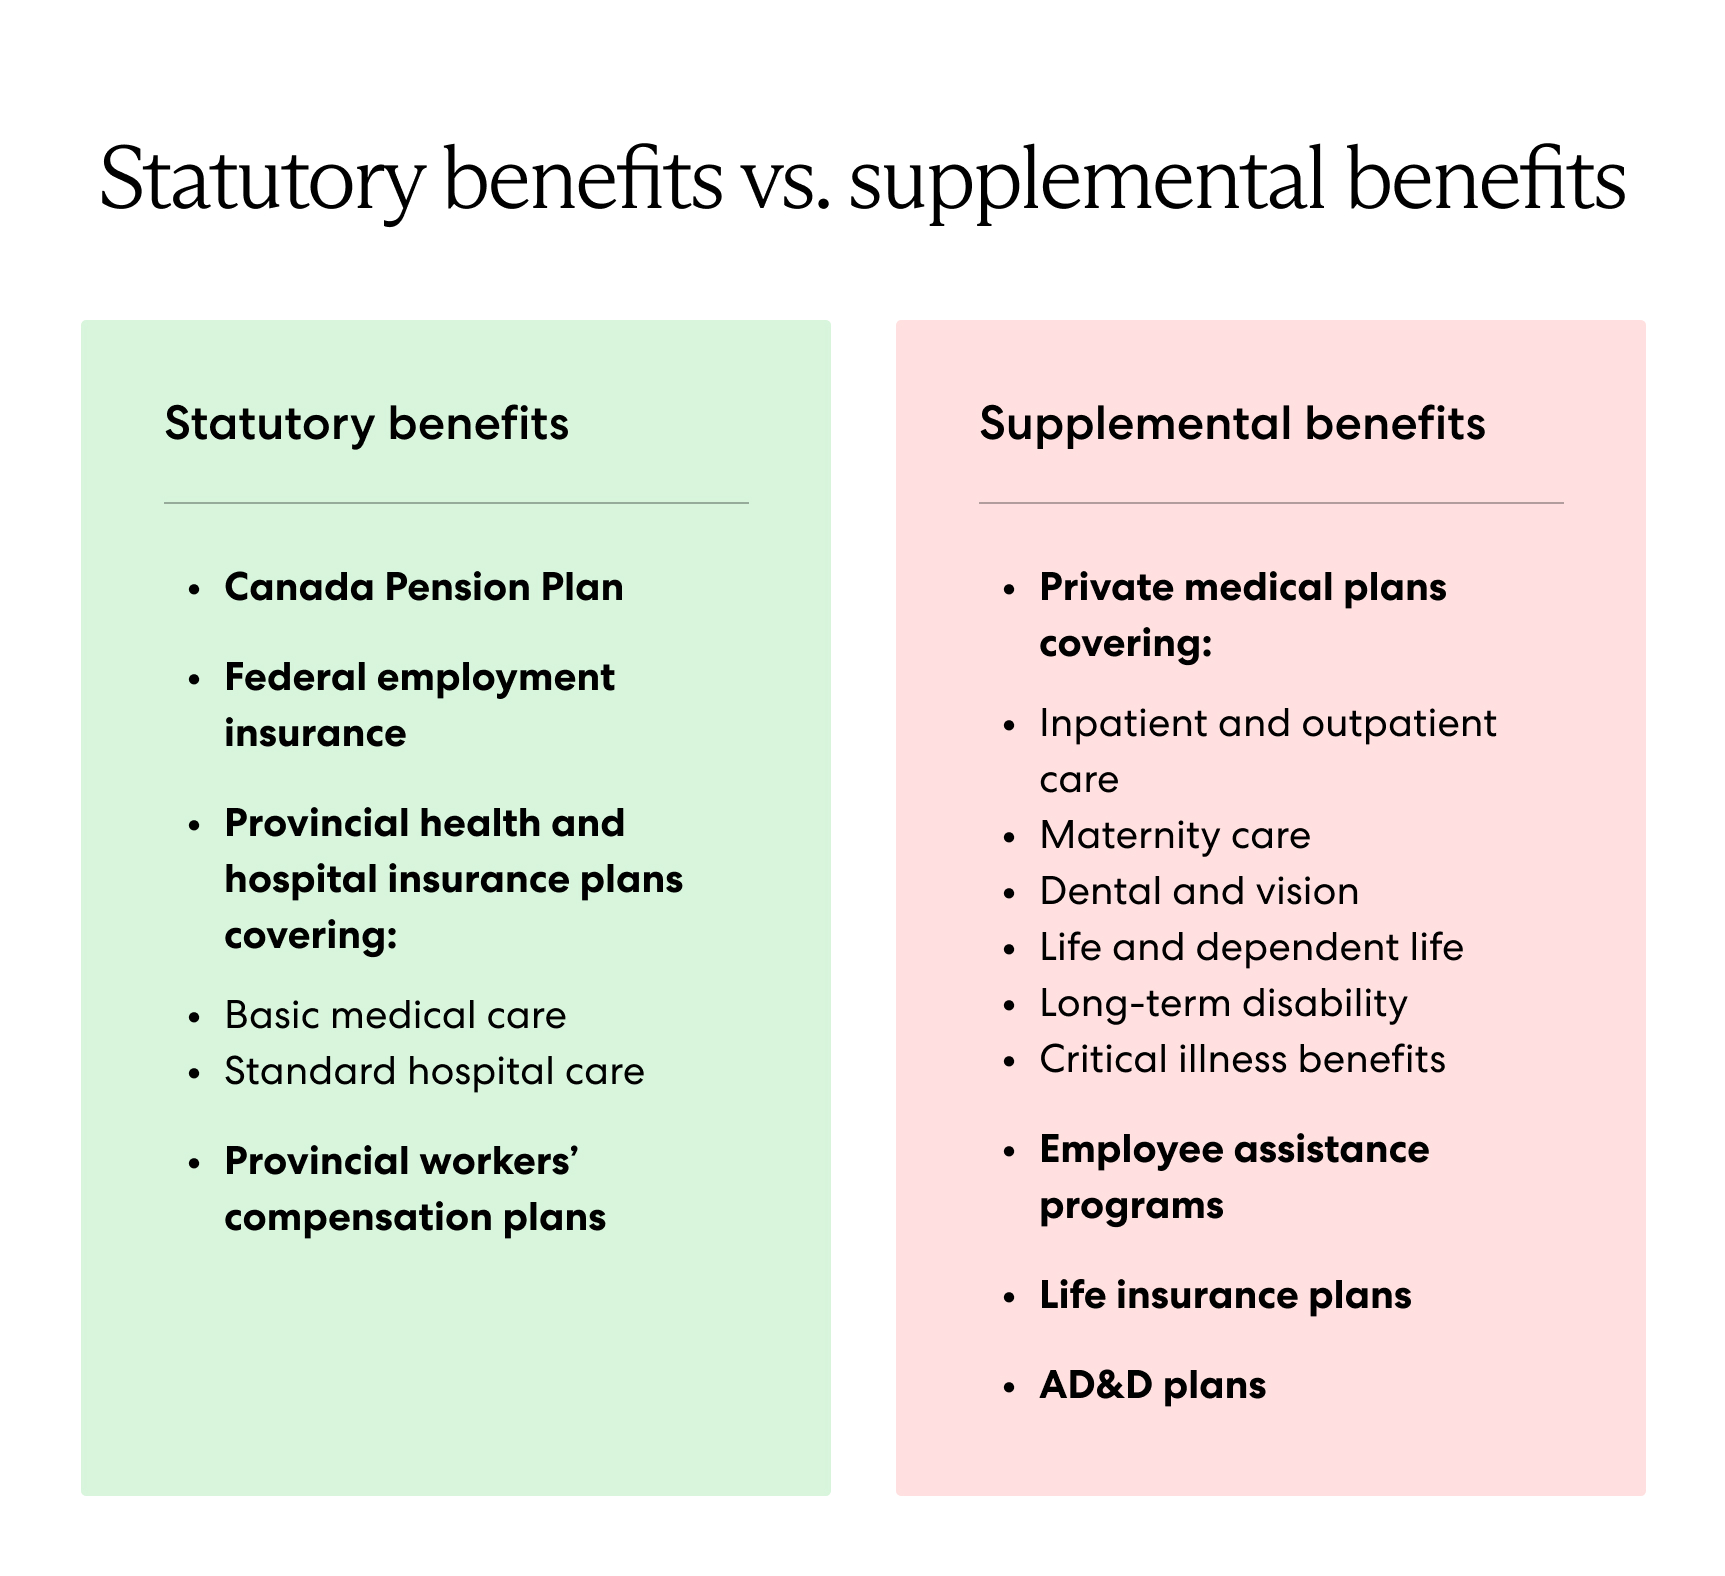 Statutory benefits in Canada include: Canada Pension Plan, federal employment insurance, provincial health and hospital insurance plans, provincial workers' compensation plans. Supplemental benefits in Canada include: Private medical plans, employee assistance programs, life insurance plans, AD&D plans